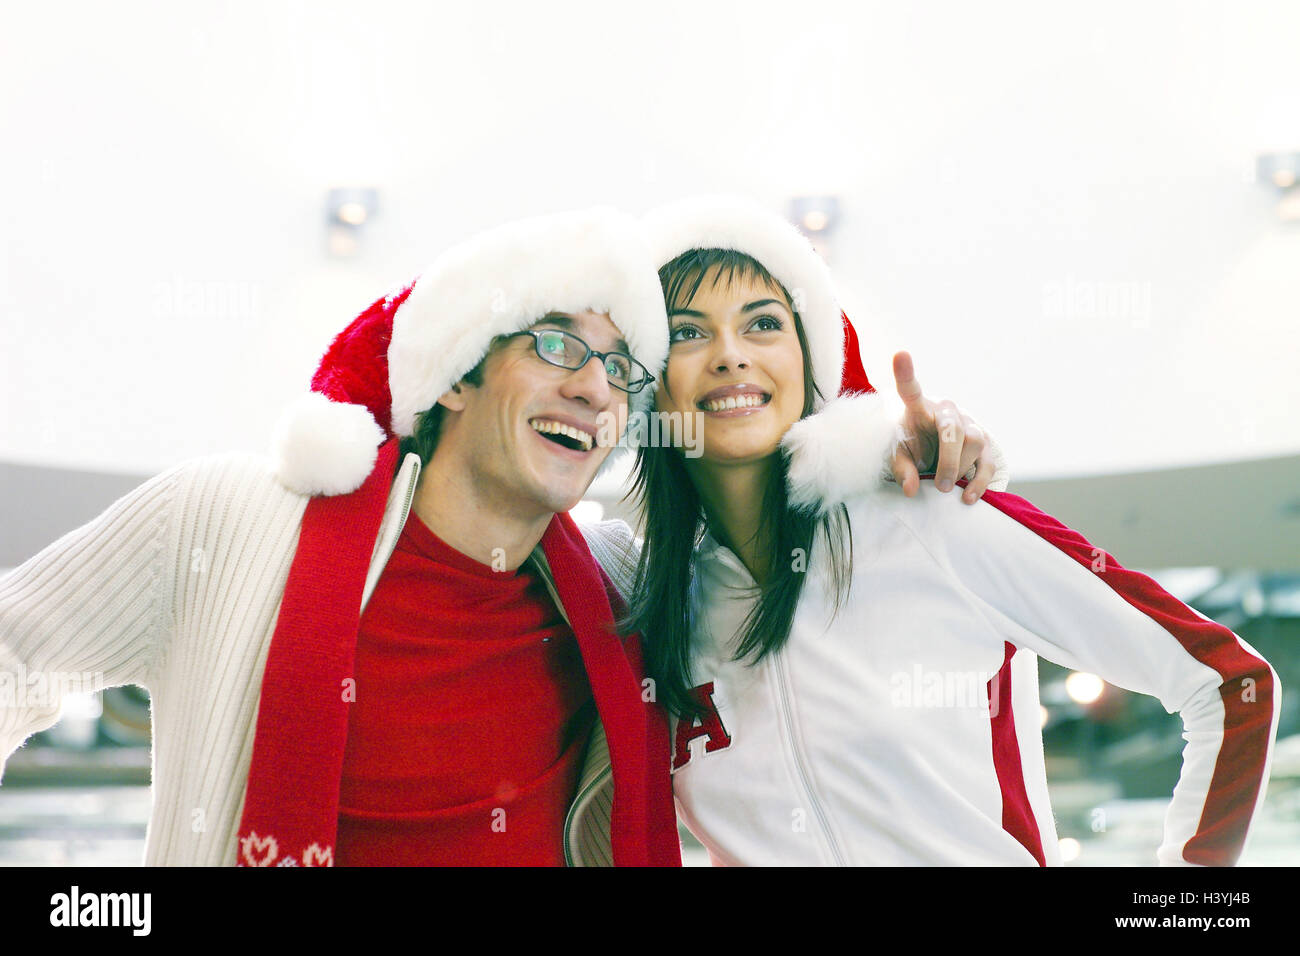 Shopping centre, couple, young, happy, Santa's hats, point, half portrait, yule tide, Christmas period, department store, purchasing, shopping, shop, Christmas shopping, enthusiasm, cheerfulness, joy, observing, together, embrace, affection, happy, caps, glasses, wearers glasses Stock Photo